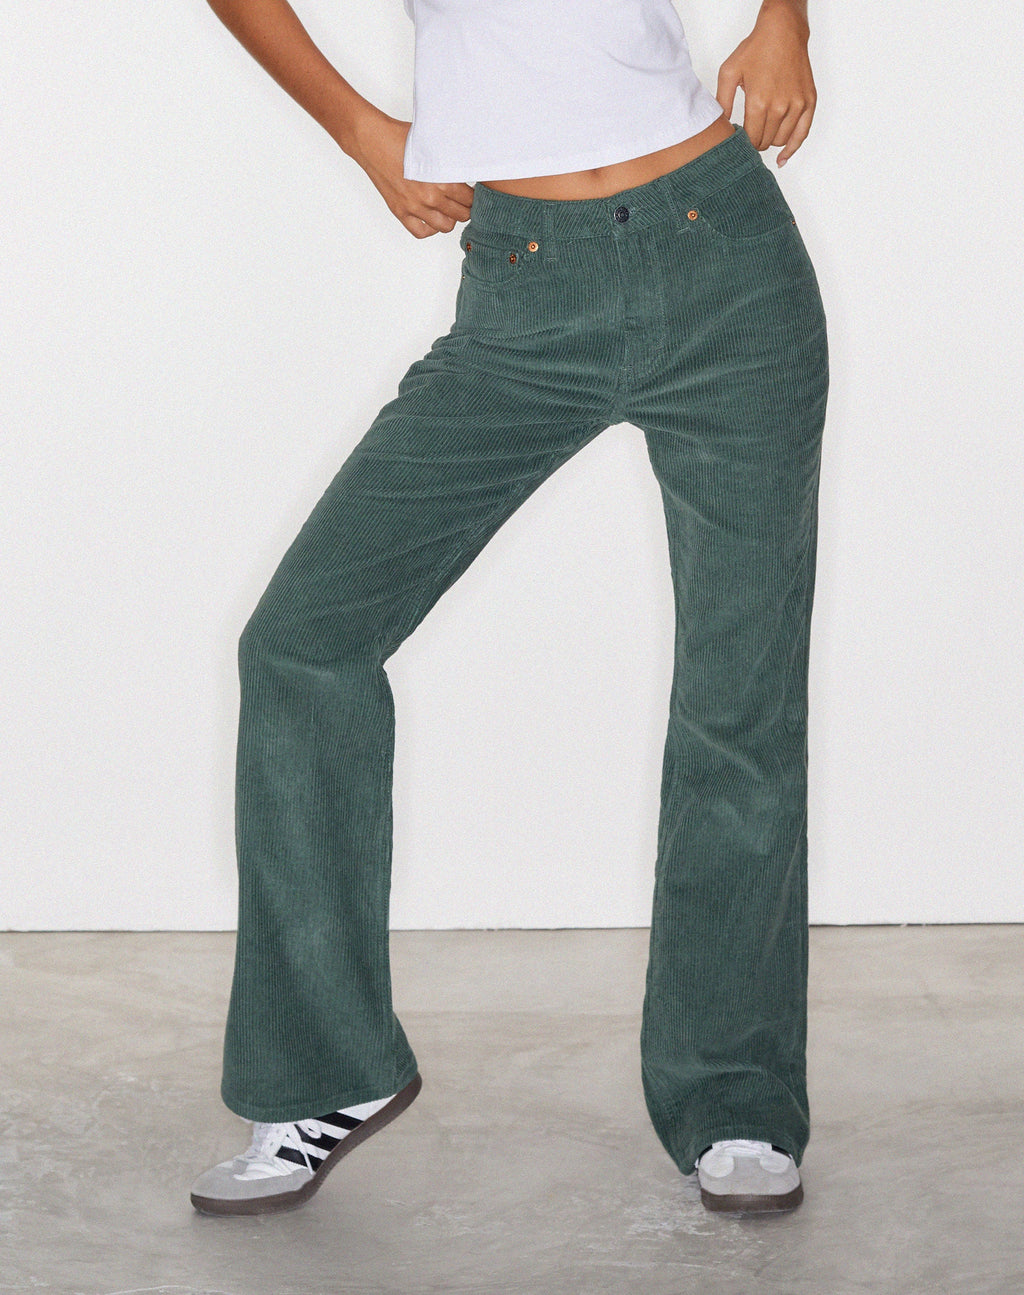 MOTEL X OLIVIA NEILL Bootleg Jeans in Cord Green